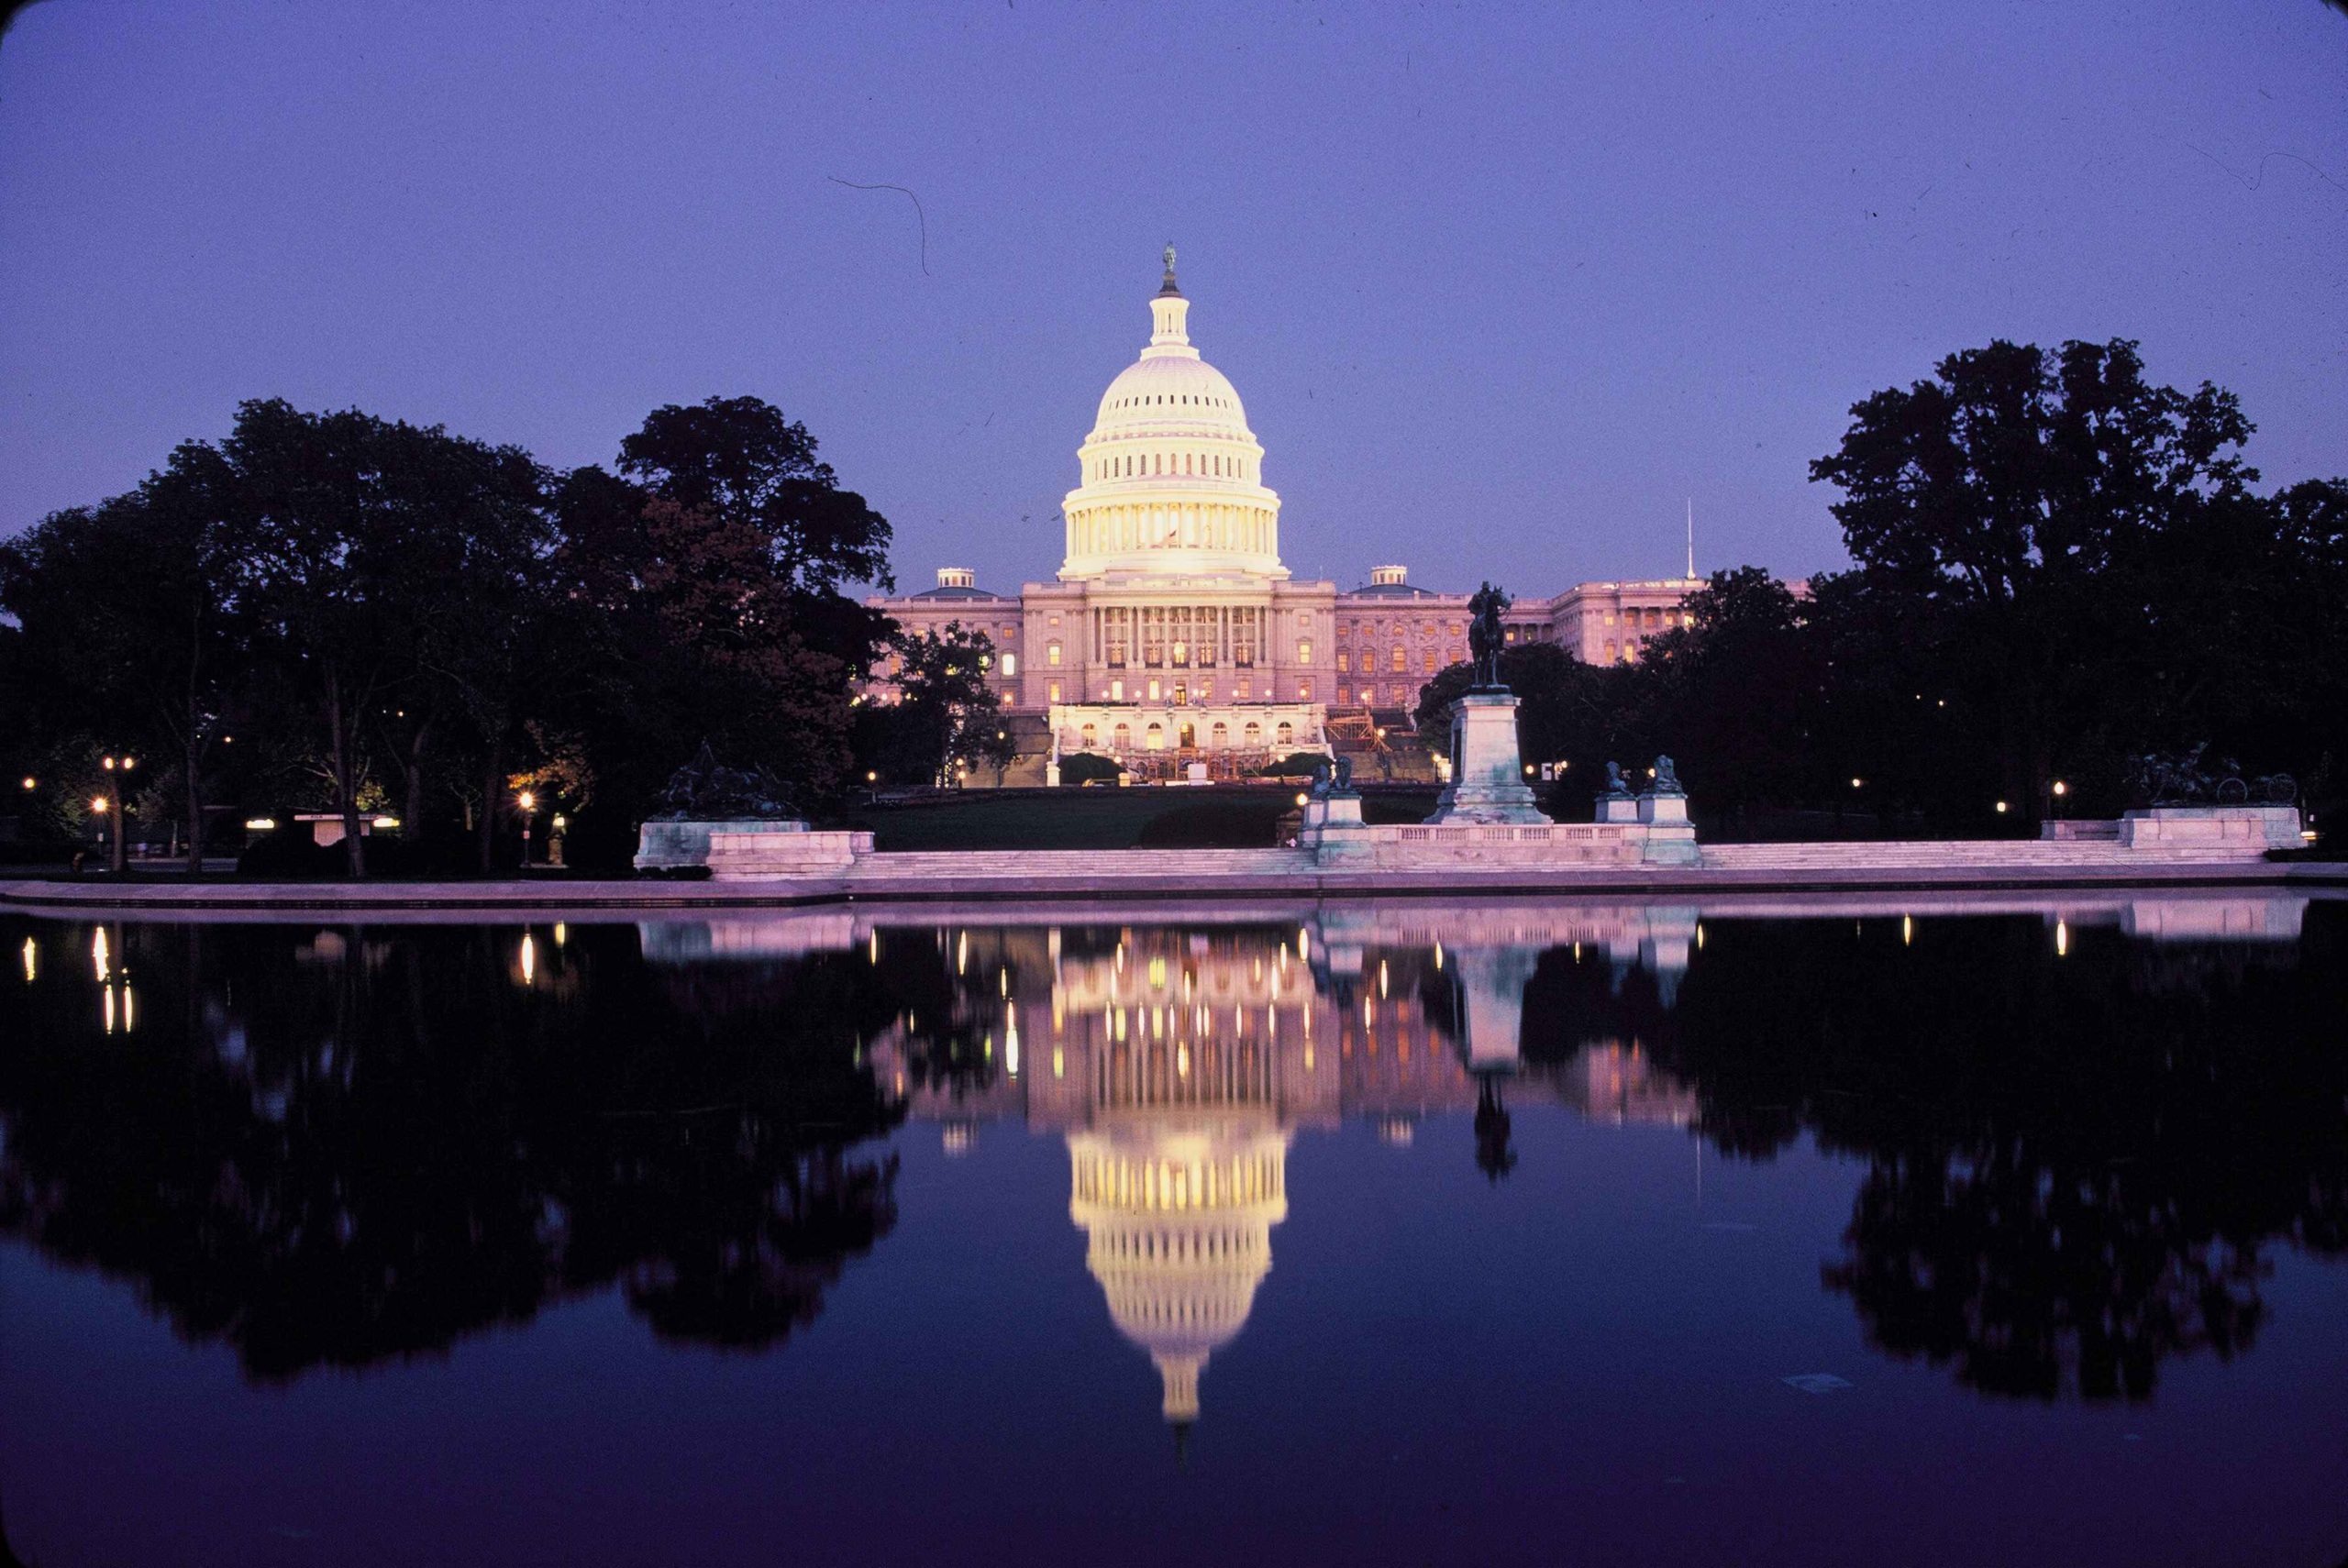 The U.S. Capitol Building at dusk and its reflection in the Reflecting Pool